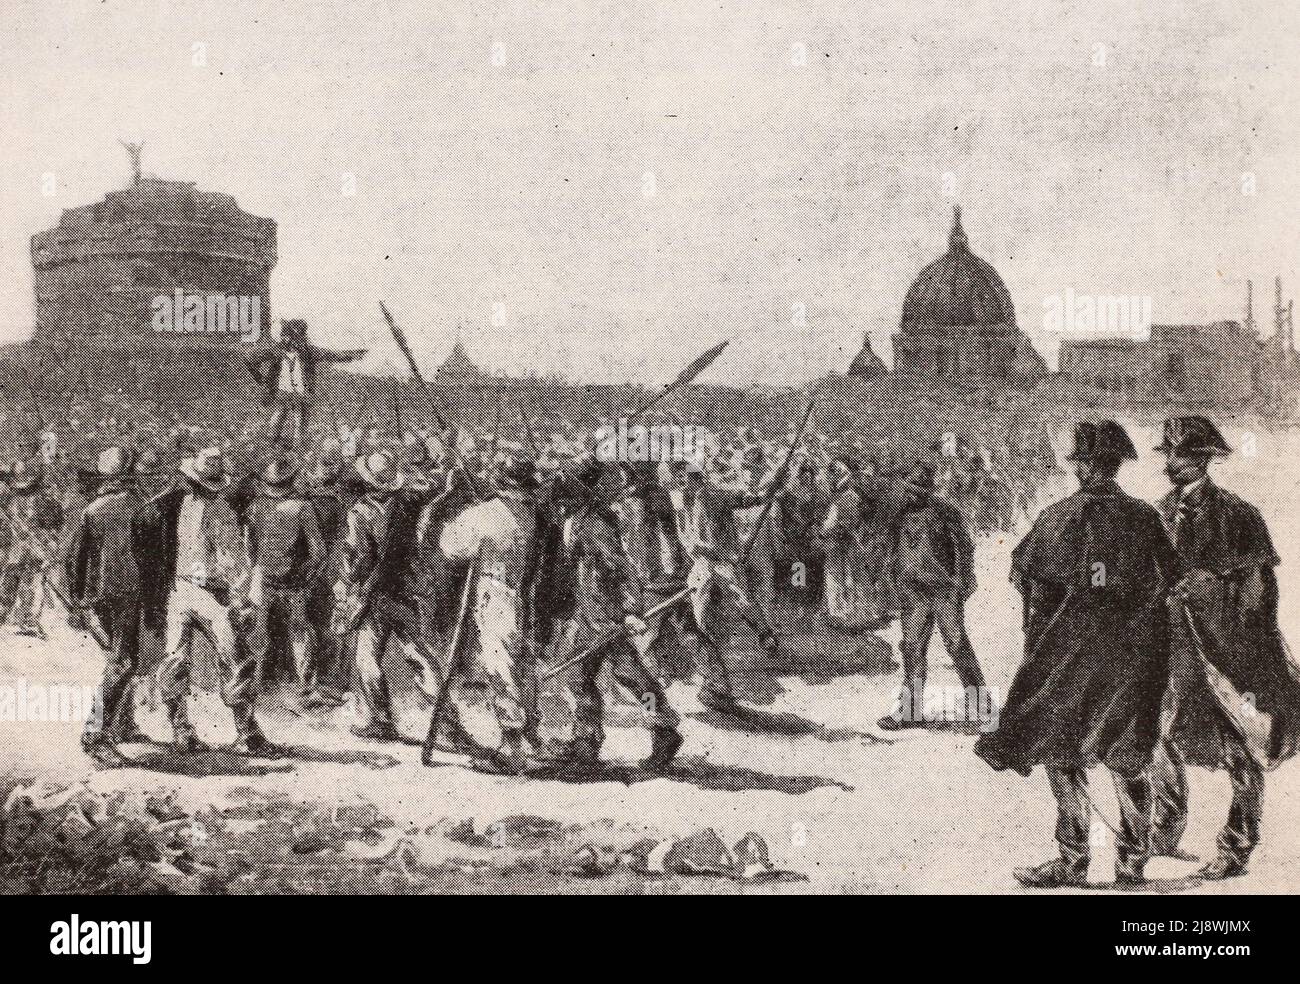 Rally of the unemployed at the Prati di Castello in Rome. Engraving from 1889. Stock Photo